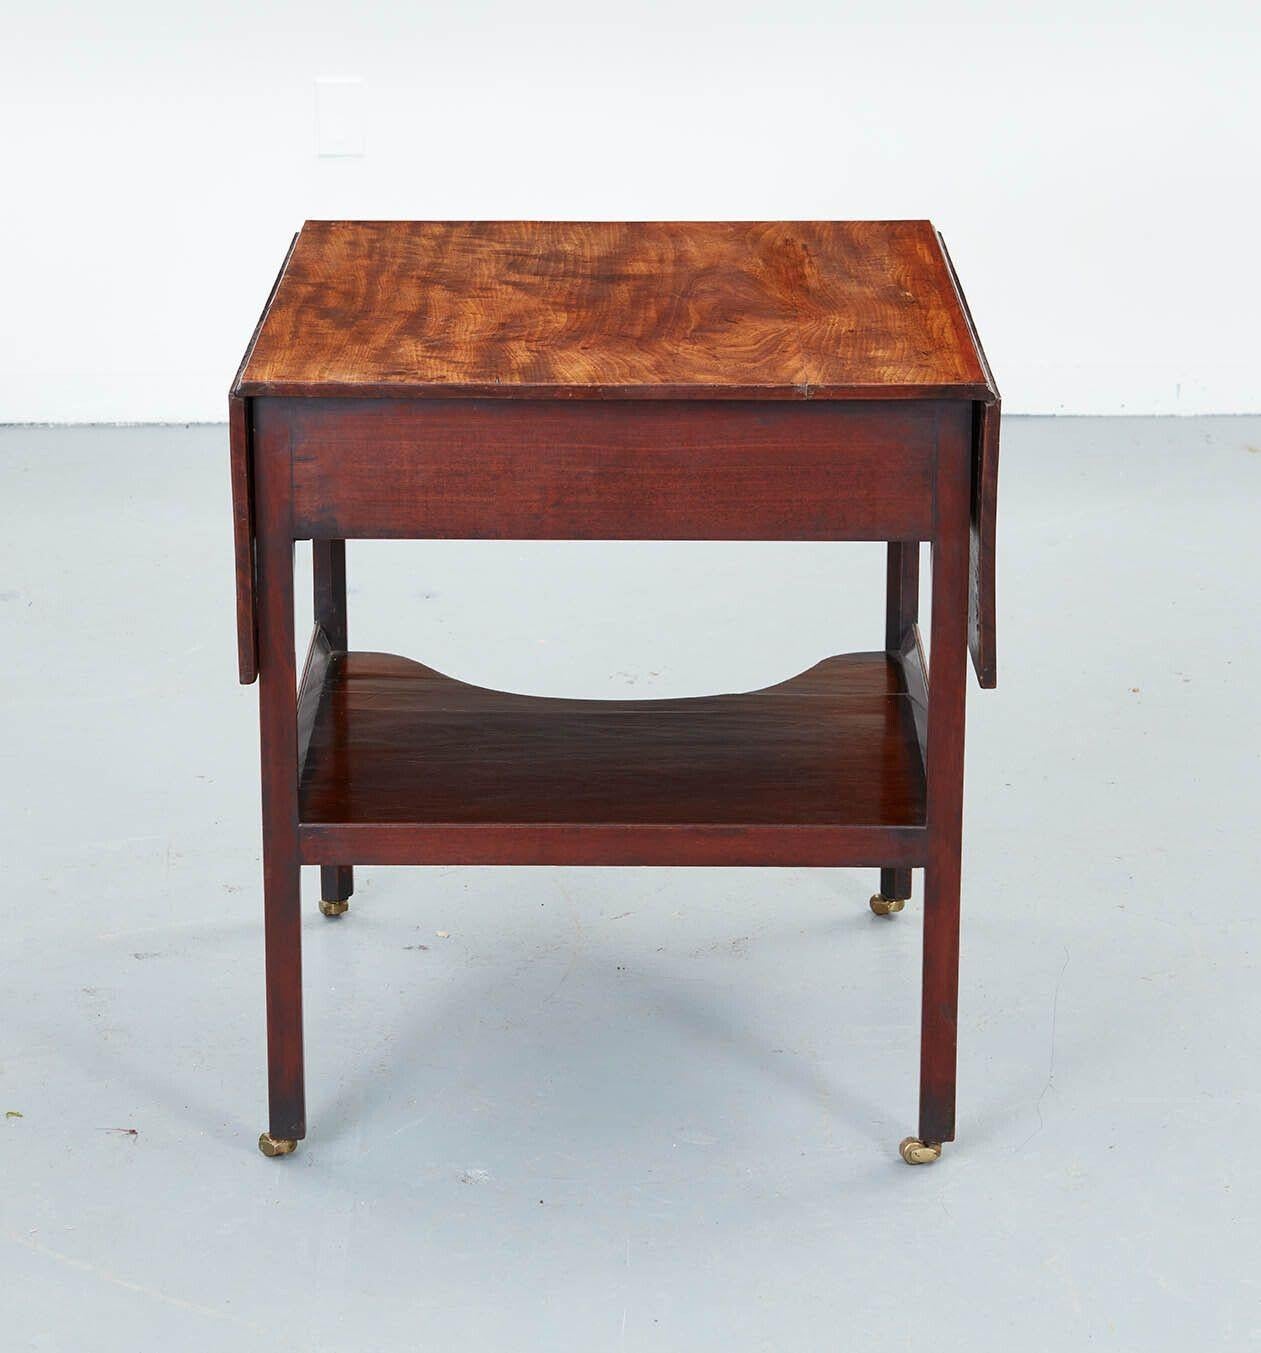 Mahogany Pembroke/Dressing Table Attributed to Thomas Chippendale